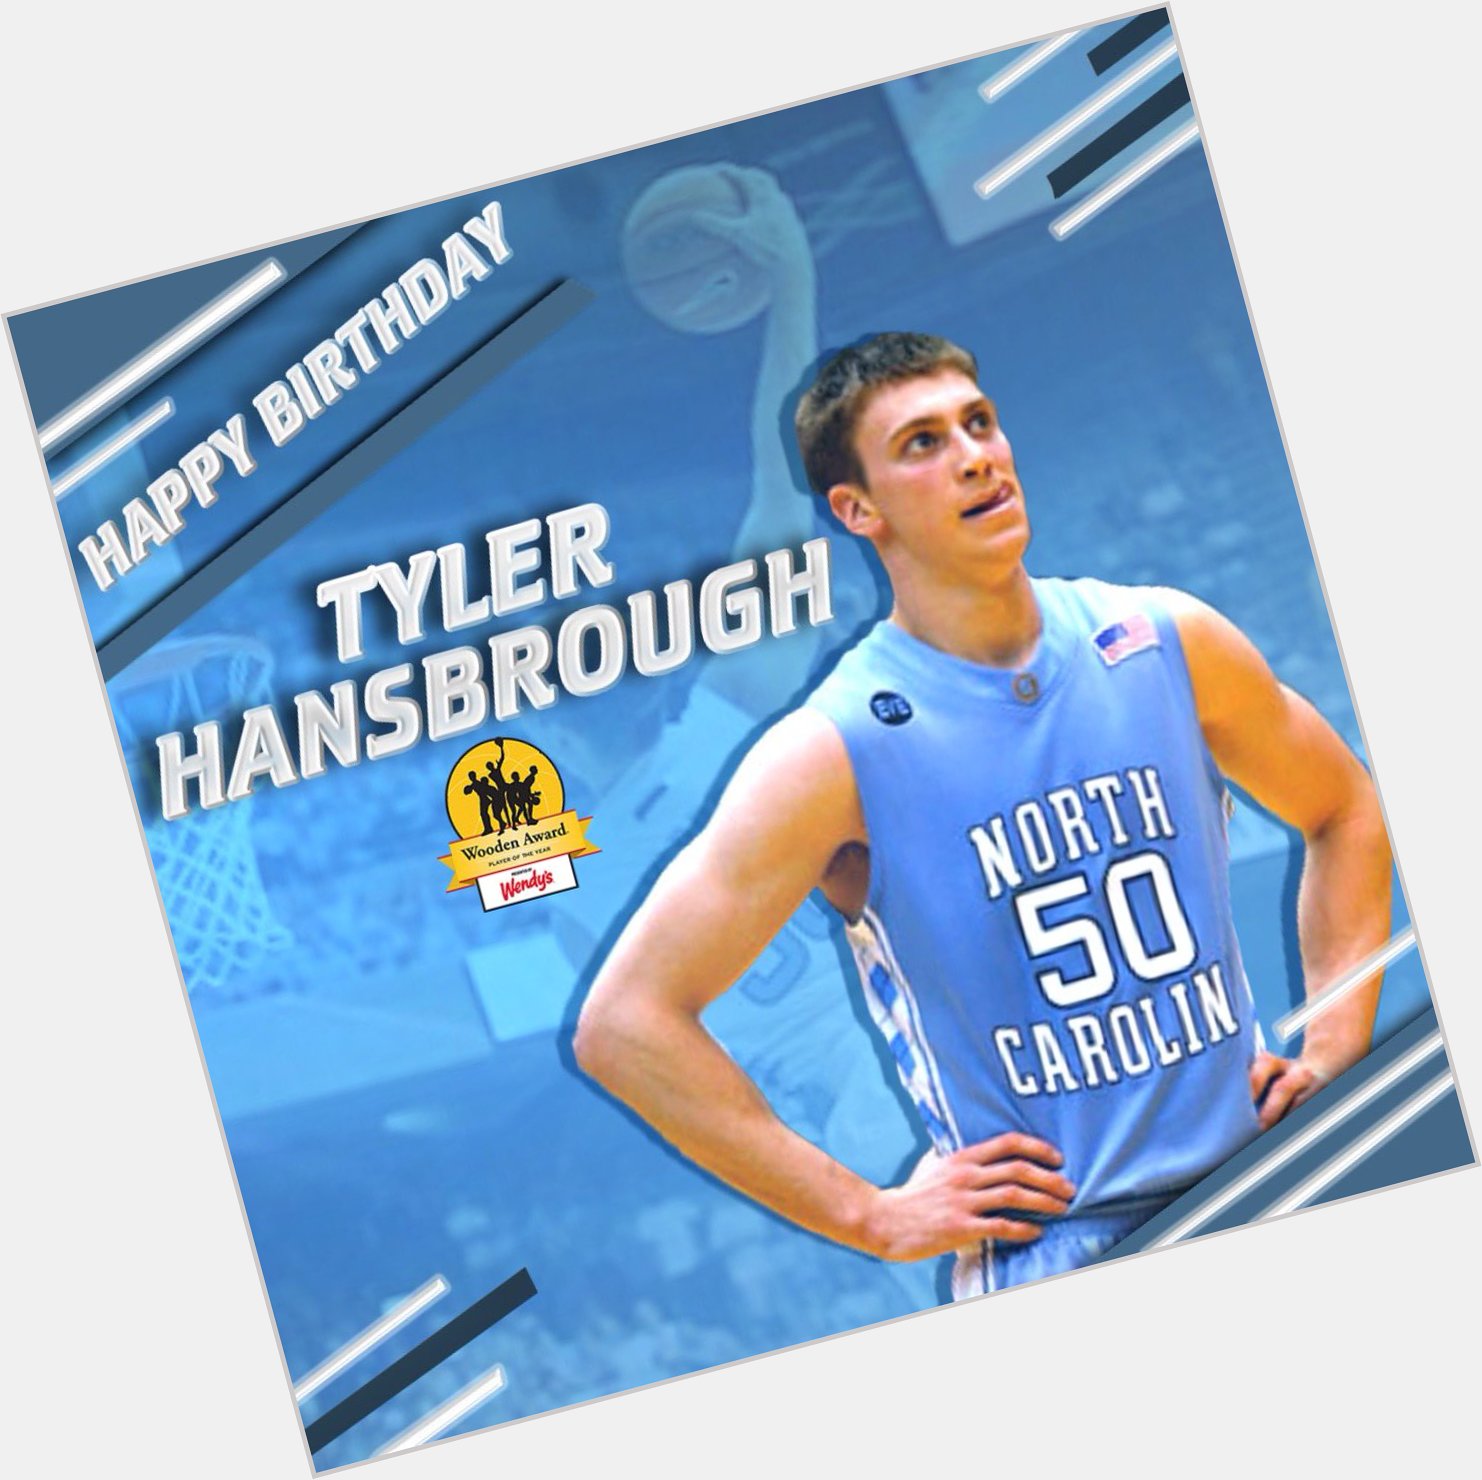 Happy Birthday to 2008 Wooden Award presented by winner Tyler Hansbrough  of 